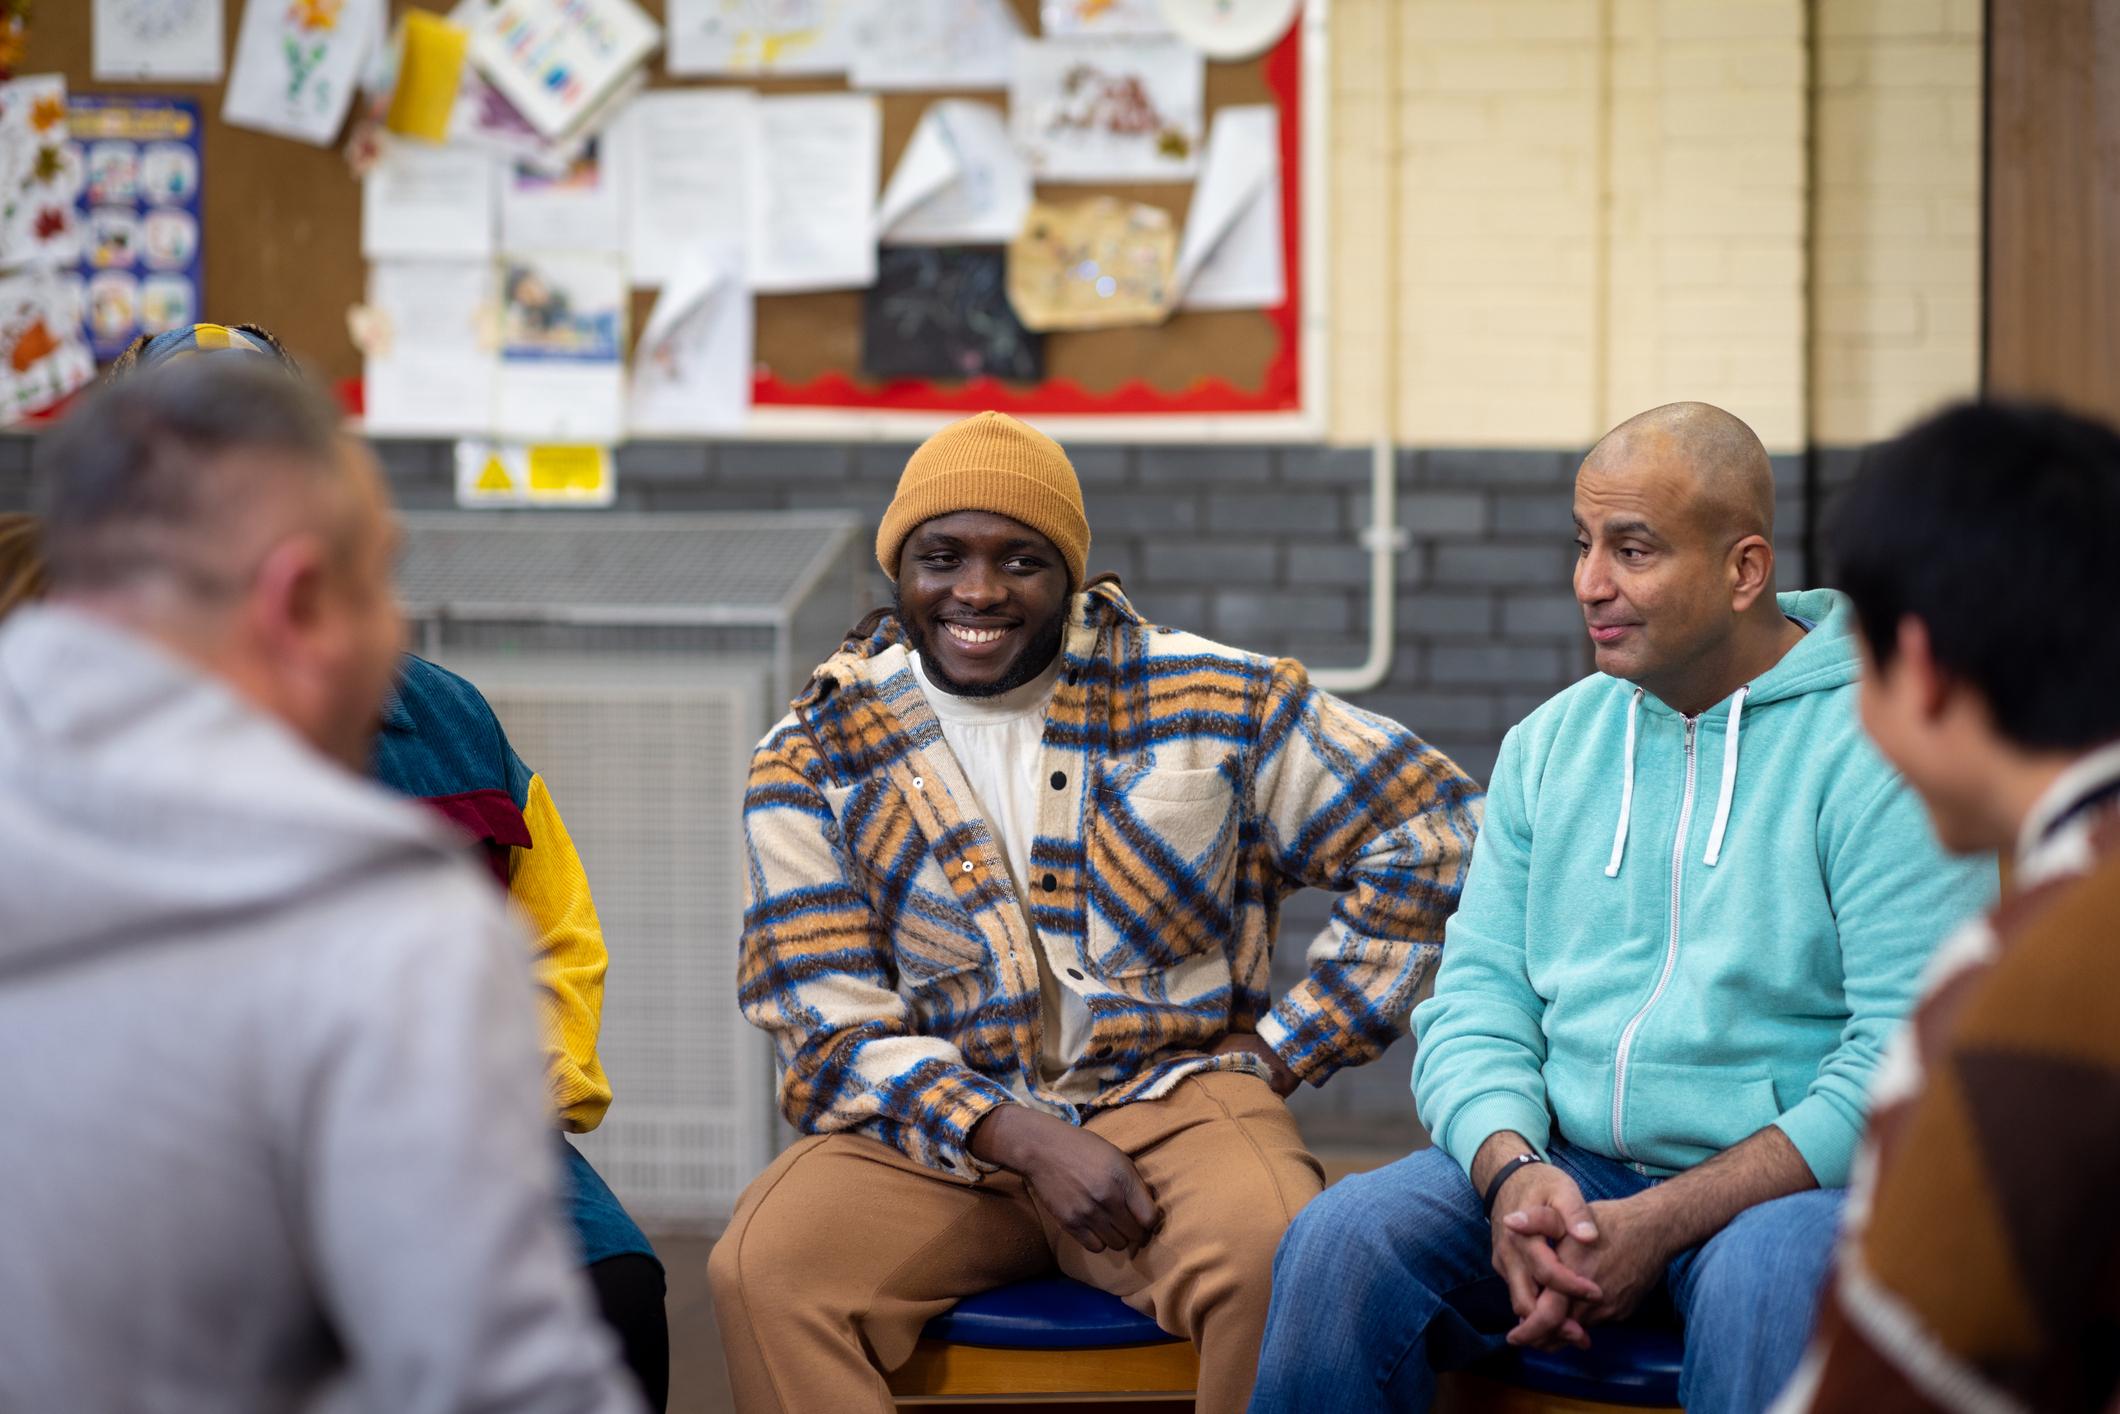 Men smiling in round circle at community centre